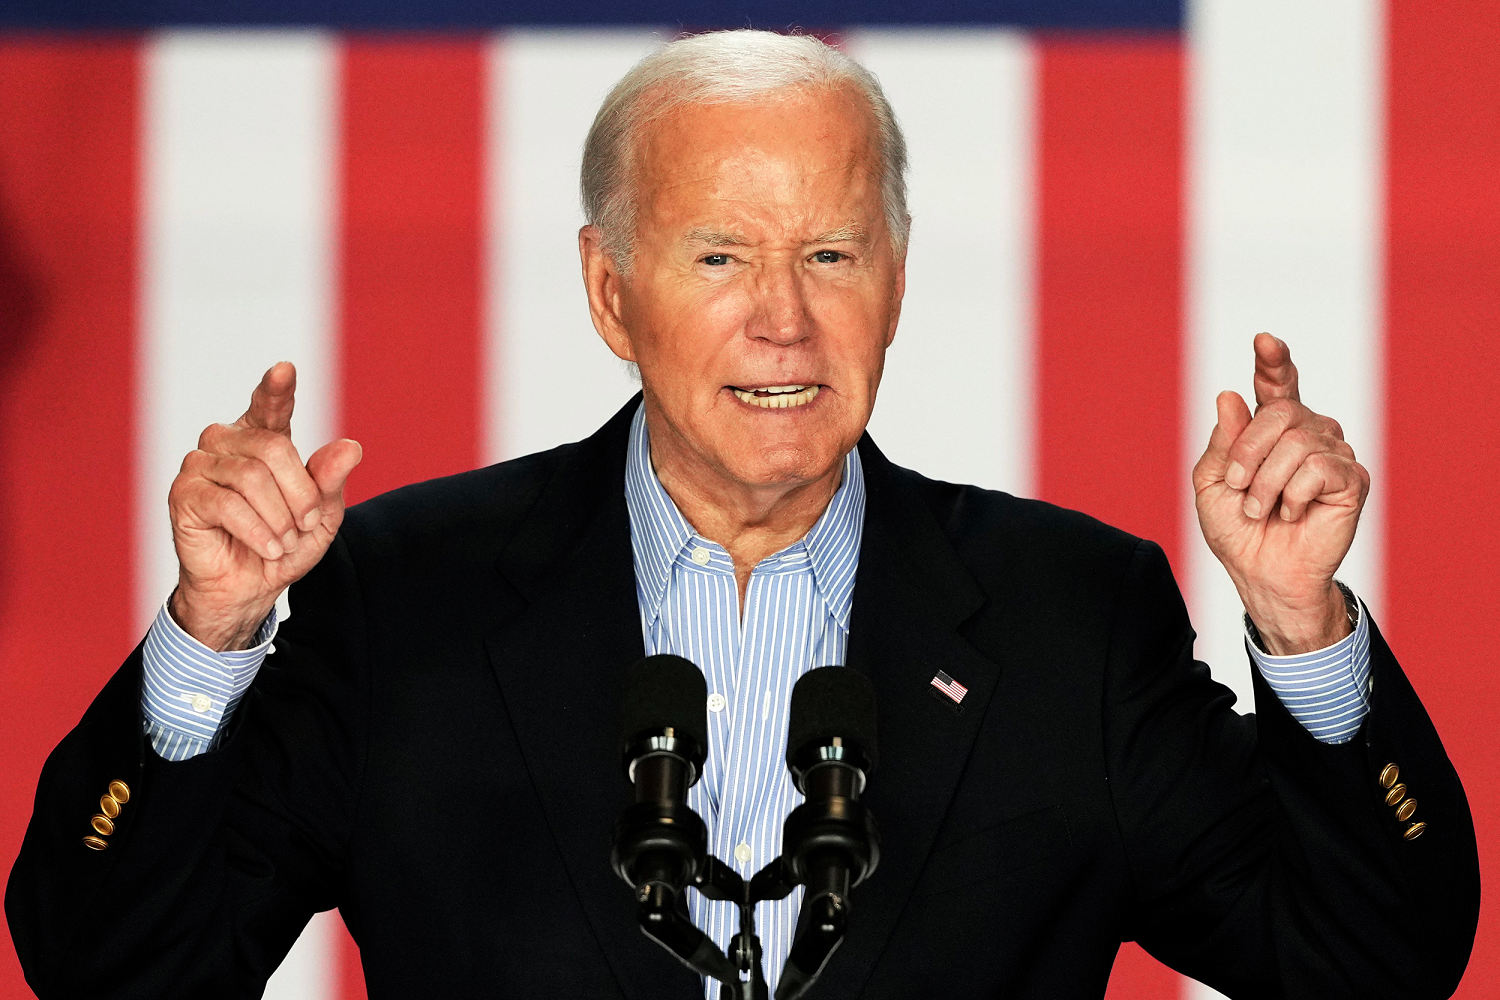 Biden doubles down at Wisconsin rally: 'I'm staying in the race'